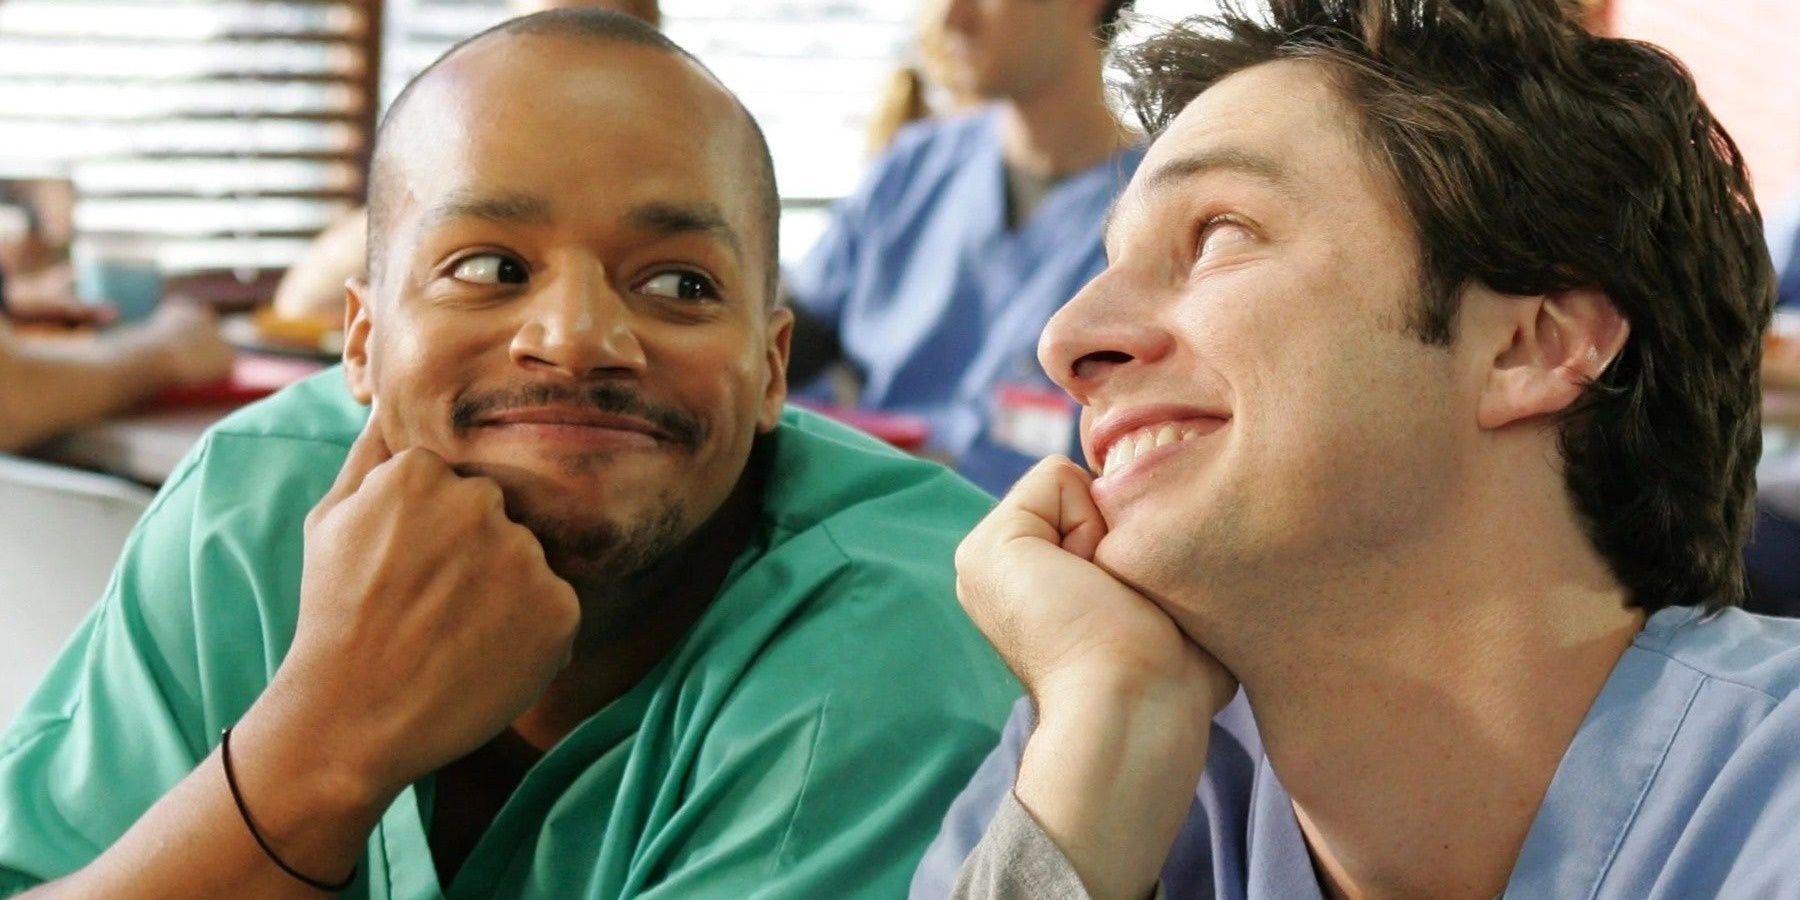 Christopher Turk and JD in Scrubs sitting side by side and smiling at each other.